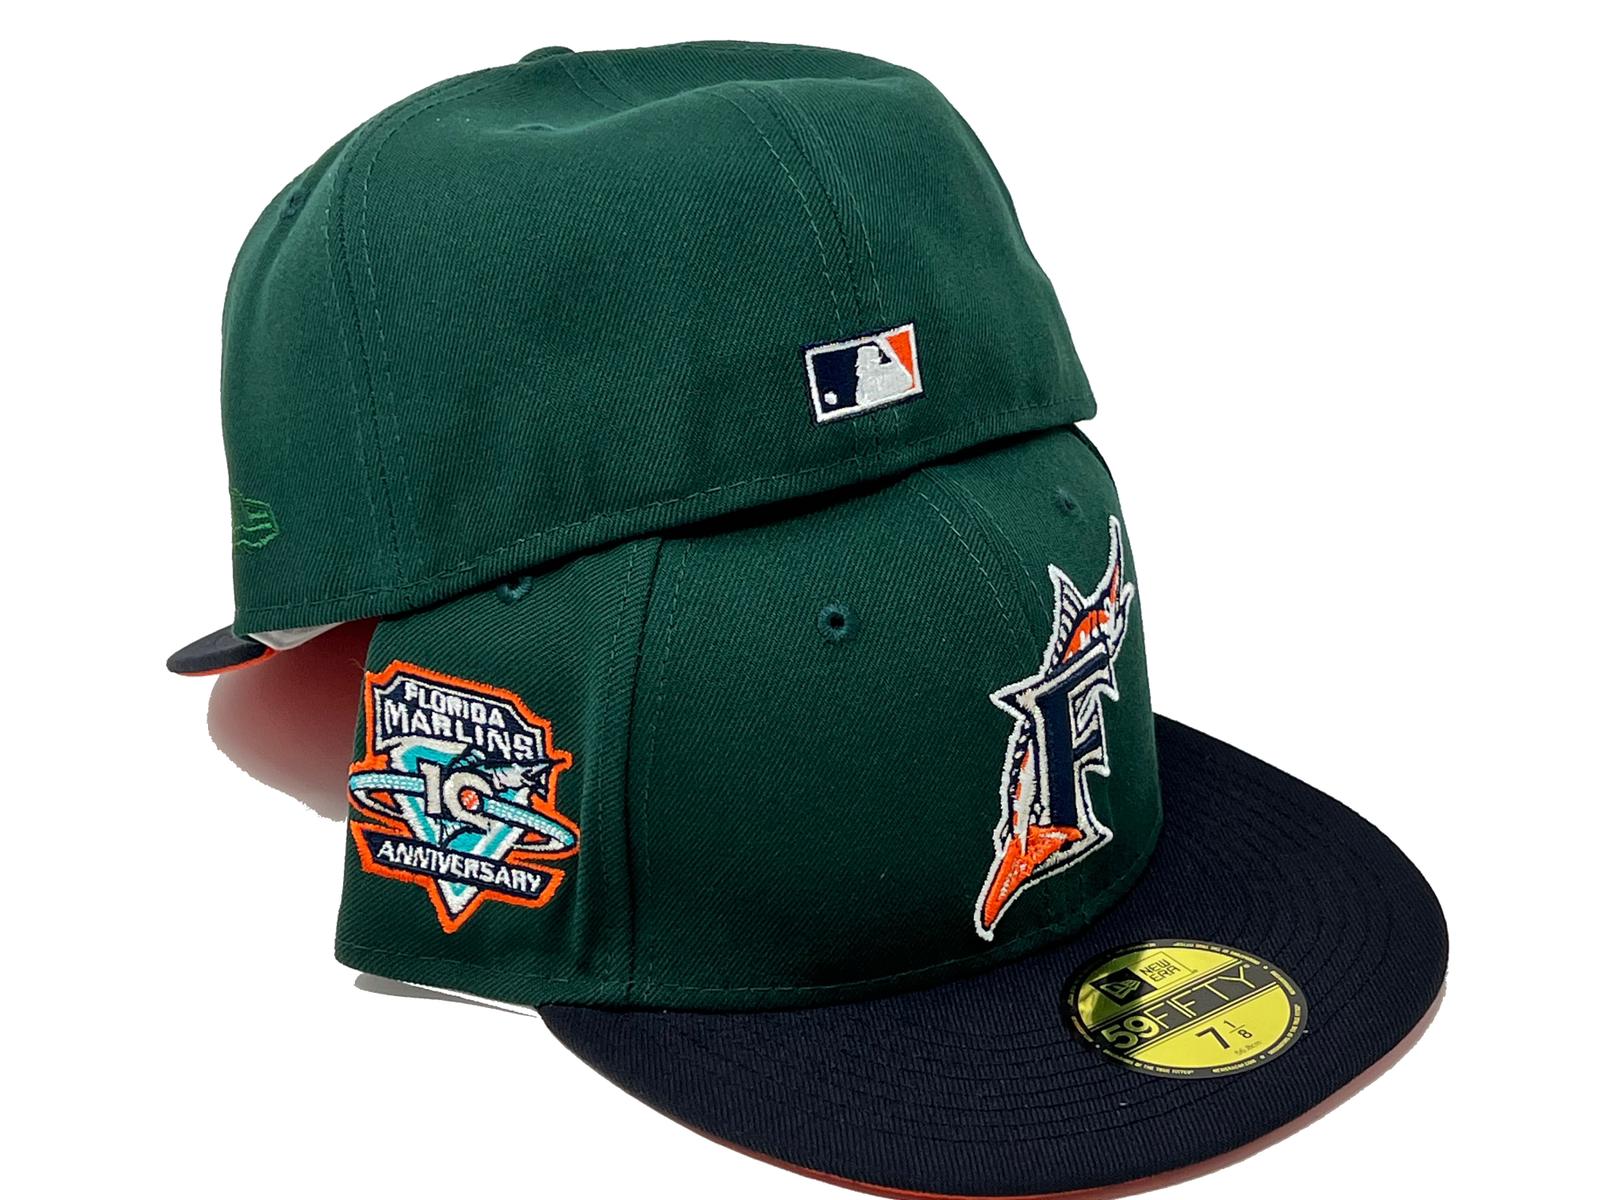 Florida Marlins New Era 10th Anniversary Patch 59FIFTY Fitted Hat -  Gray/Black